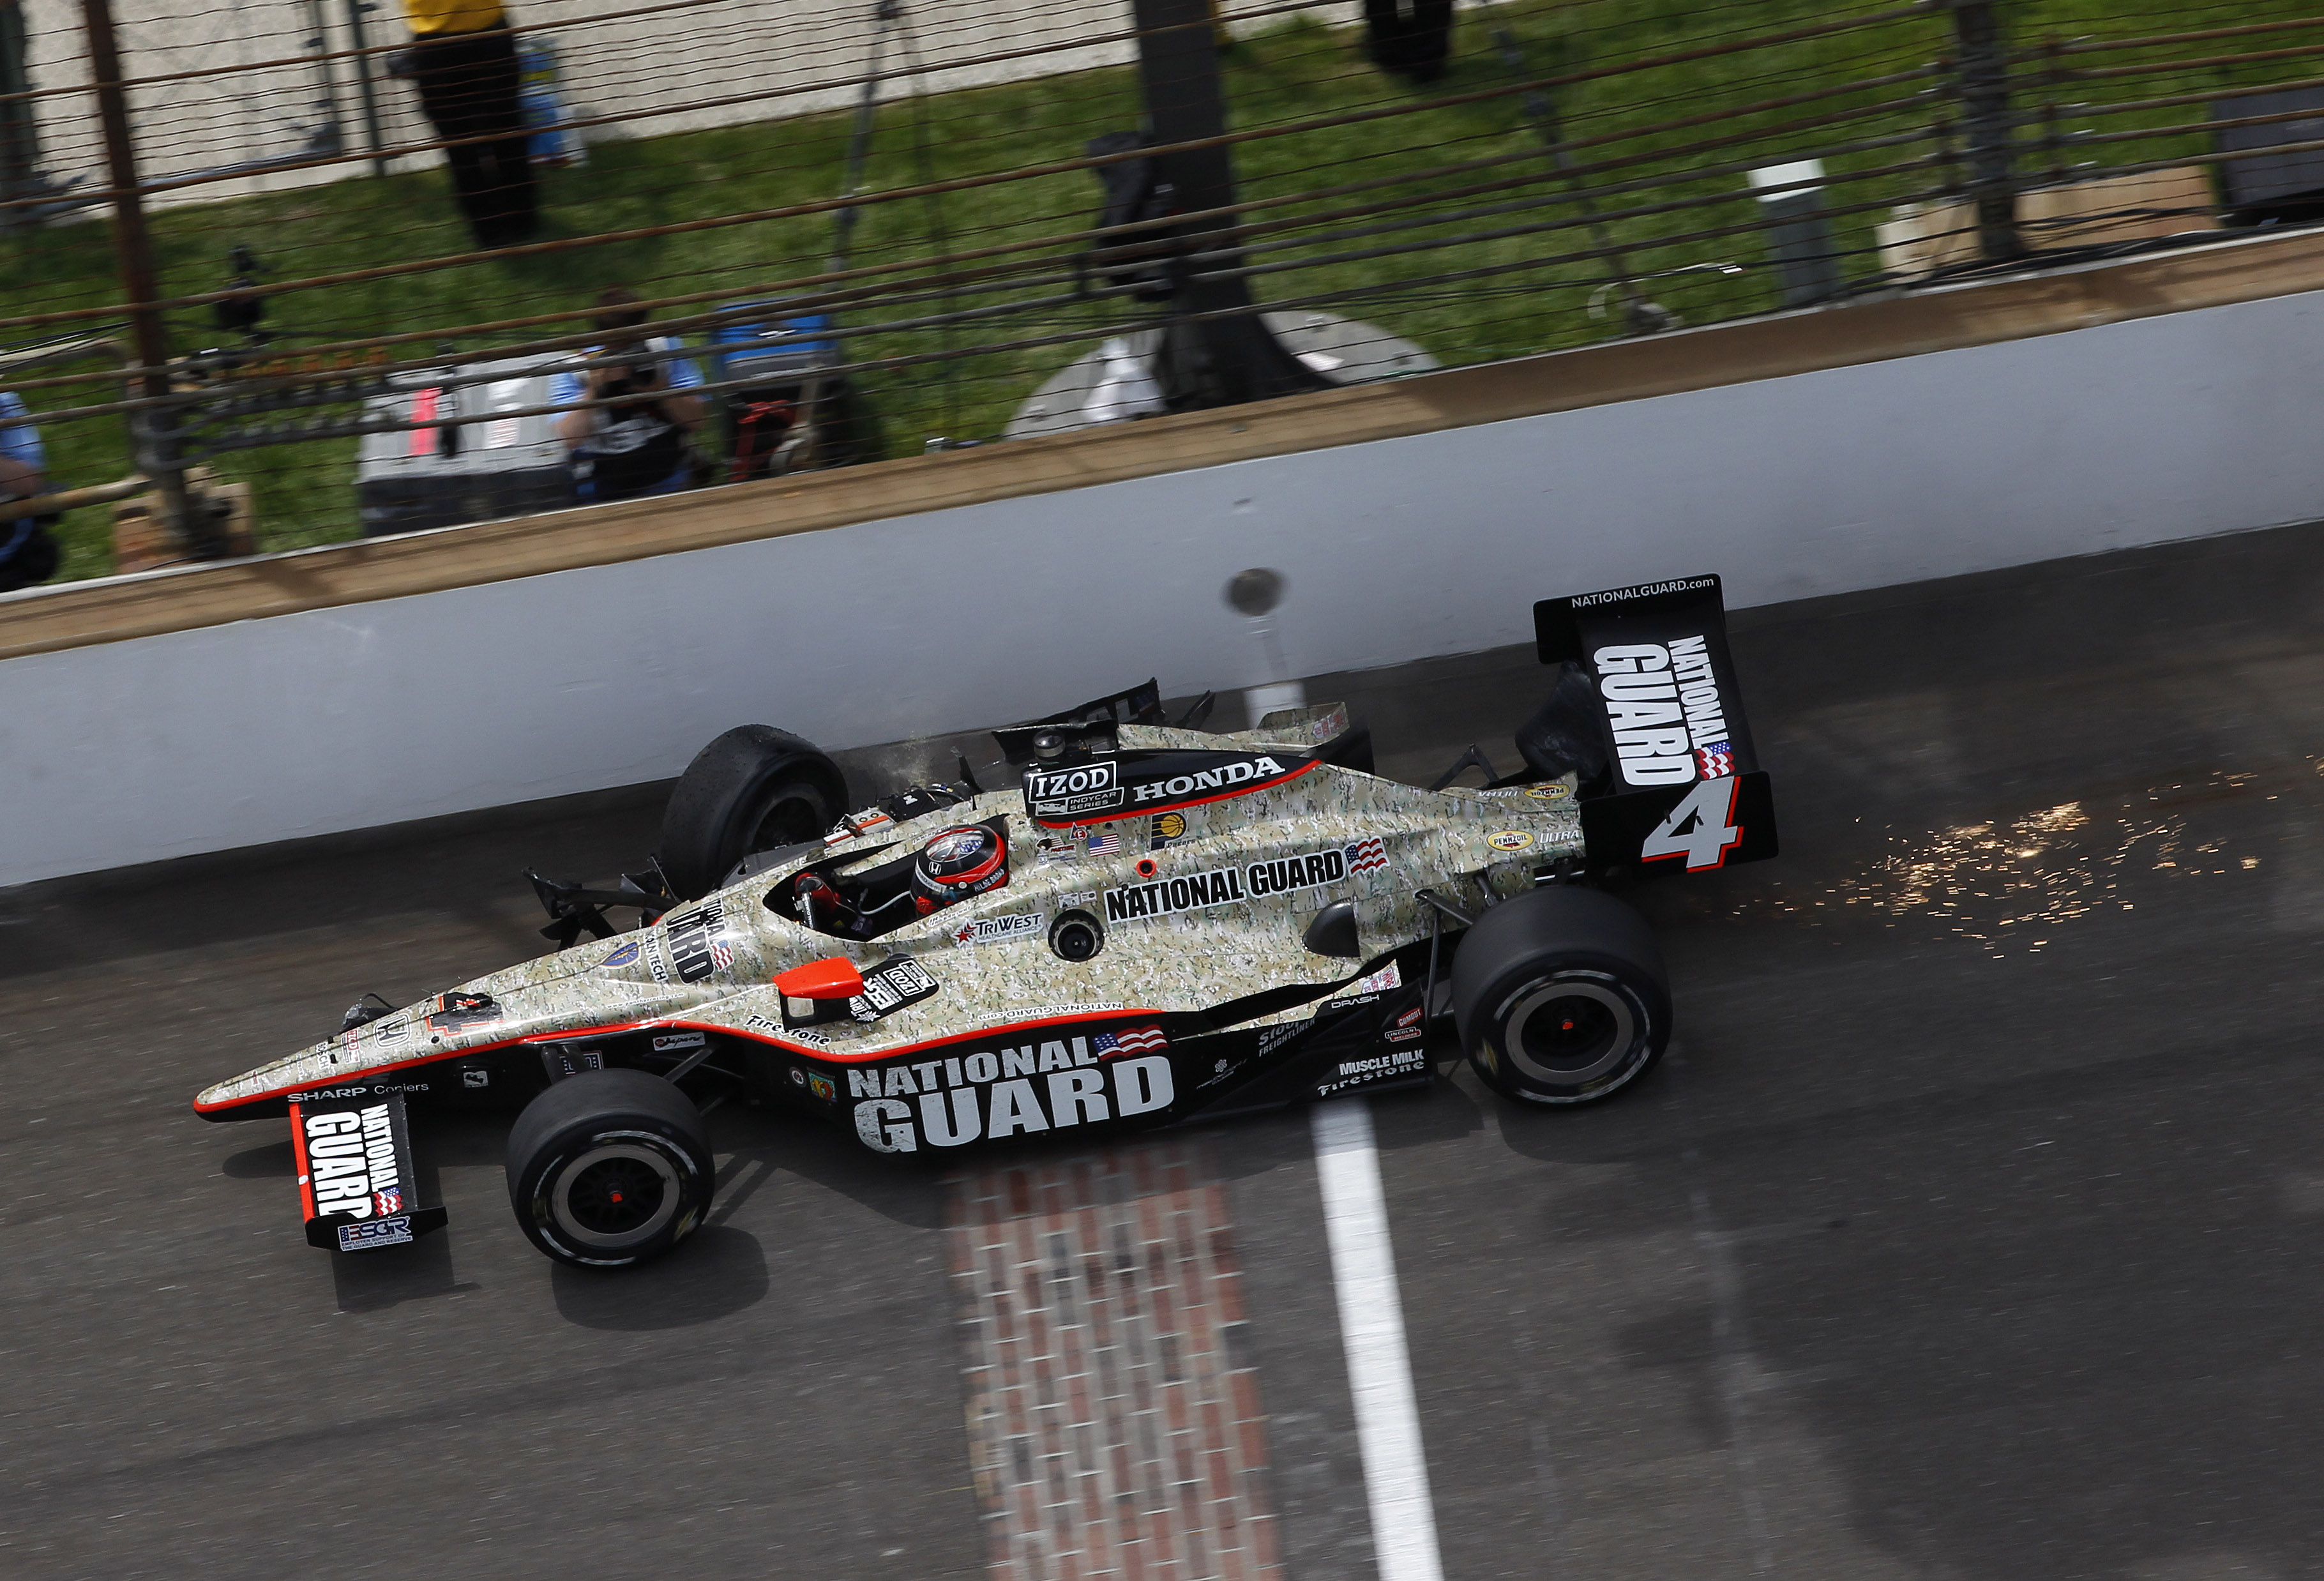 2011 Indycar Indy 500 Race Priority